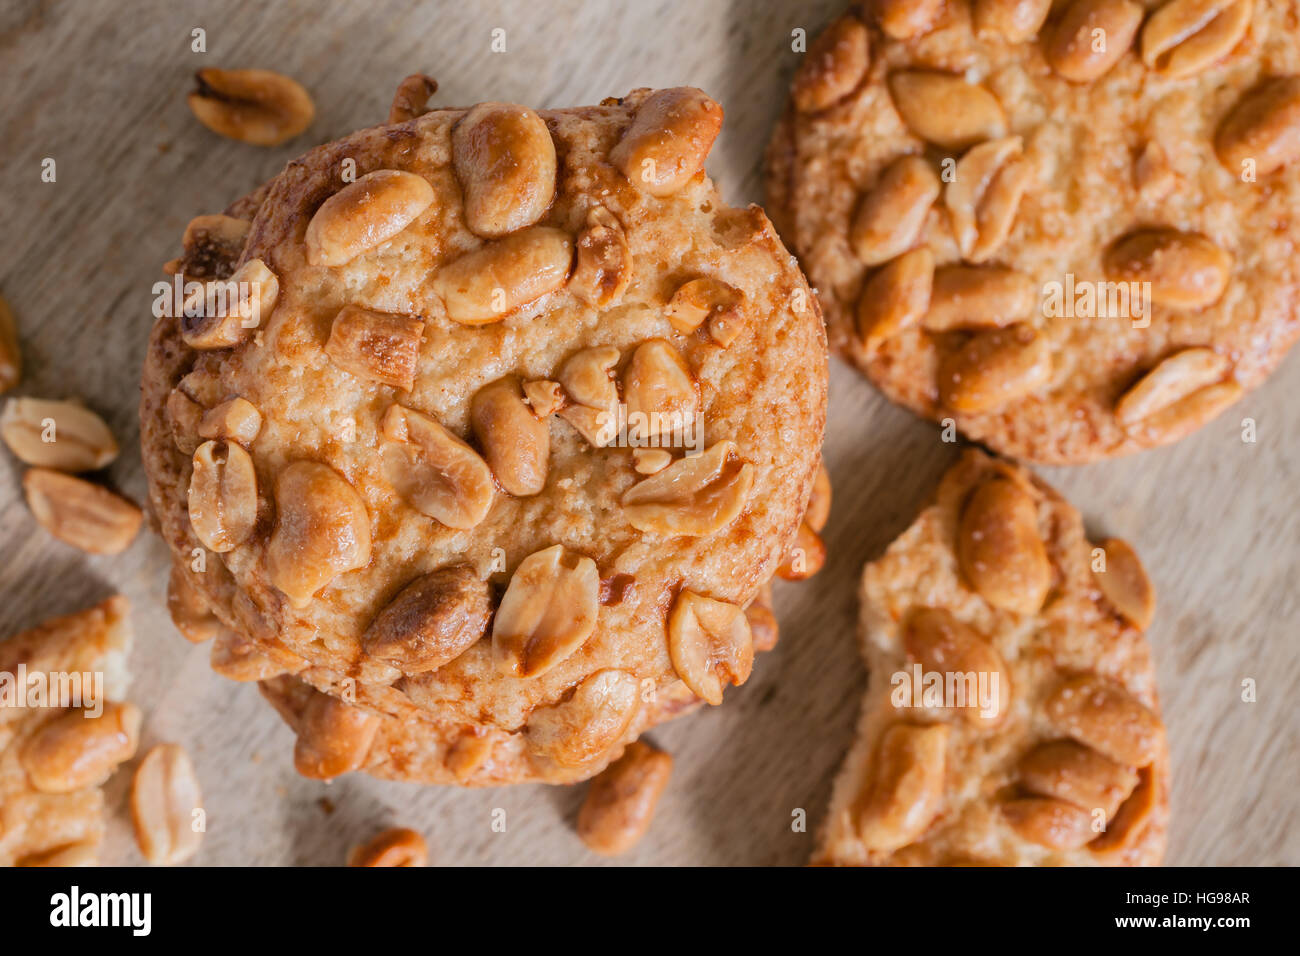 Salted crunchy peanut cookies freshly baked with crumbs and pieces on a wooden plate top down view Stock Photo